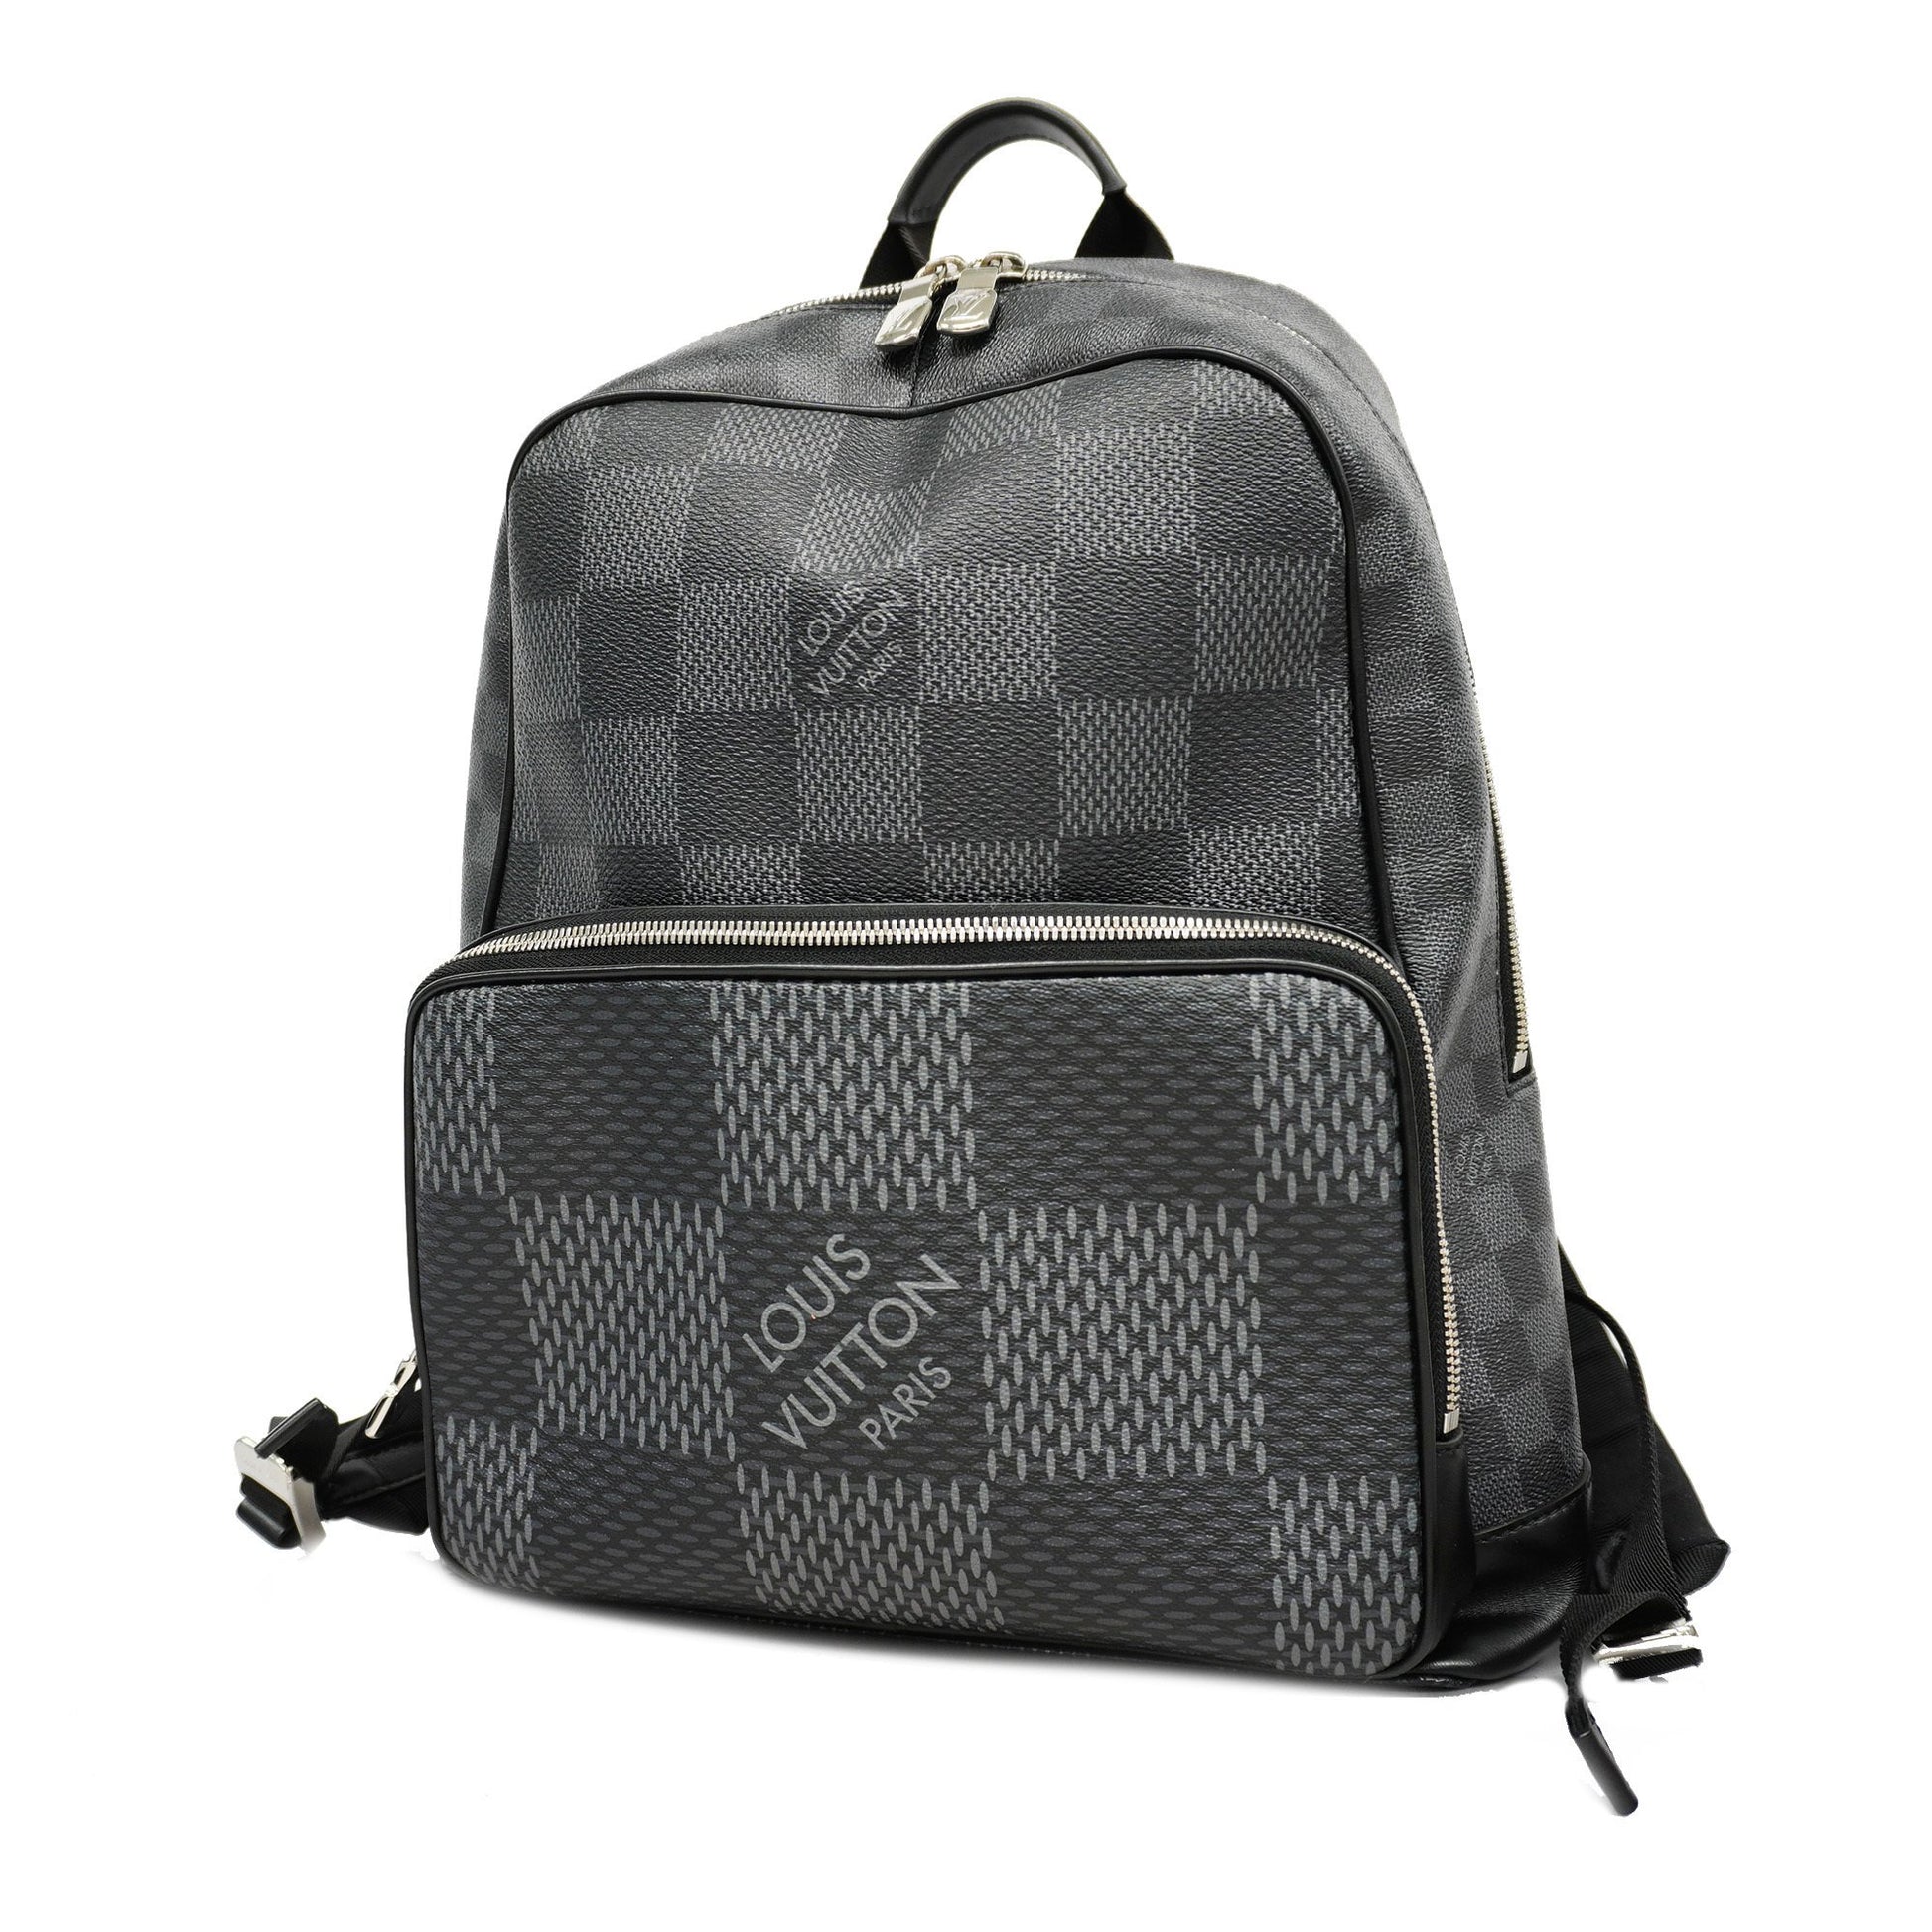 Shop Louis Vuitton DAMIER Campus backpack (N50009) by ☆MIMOSA